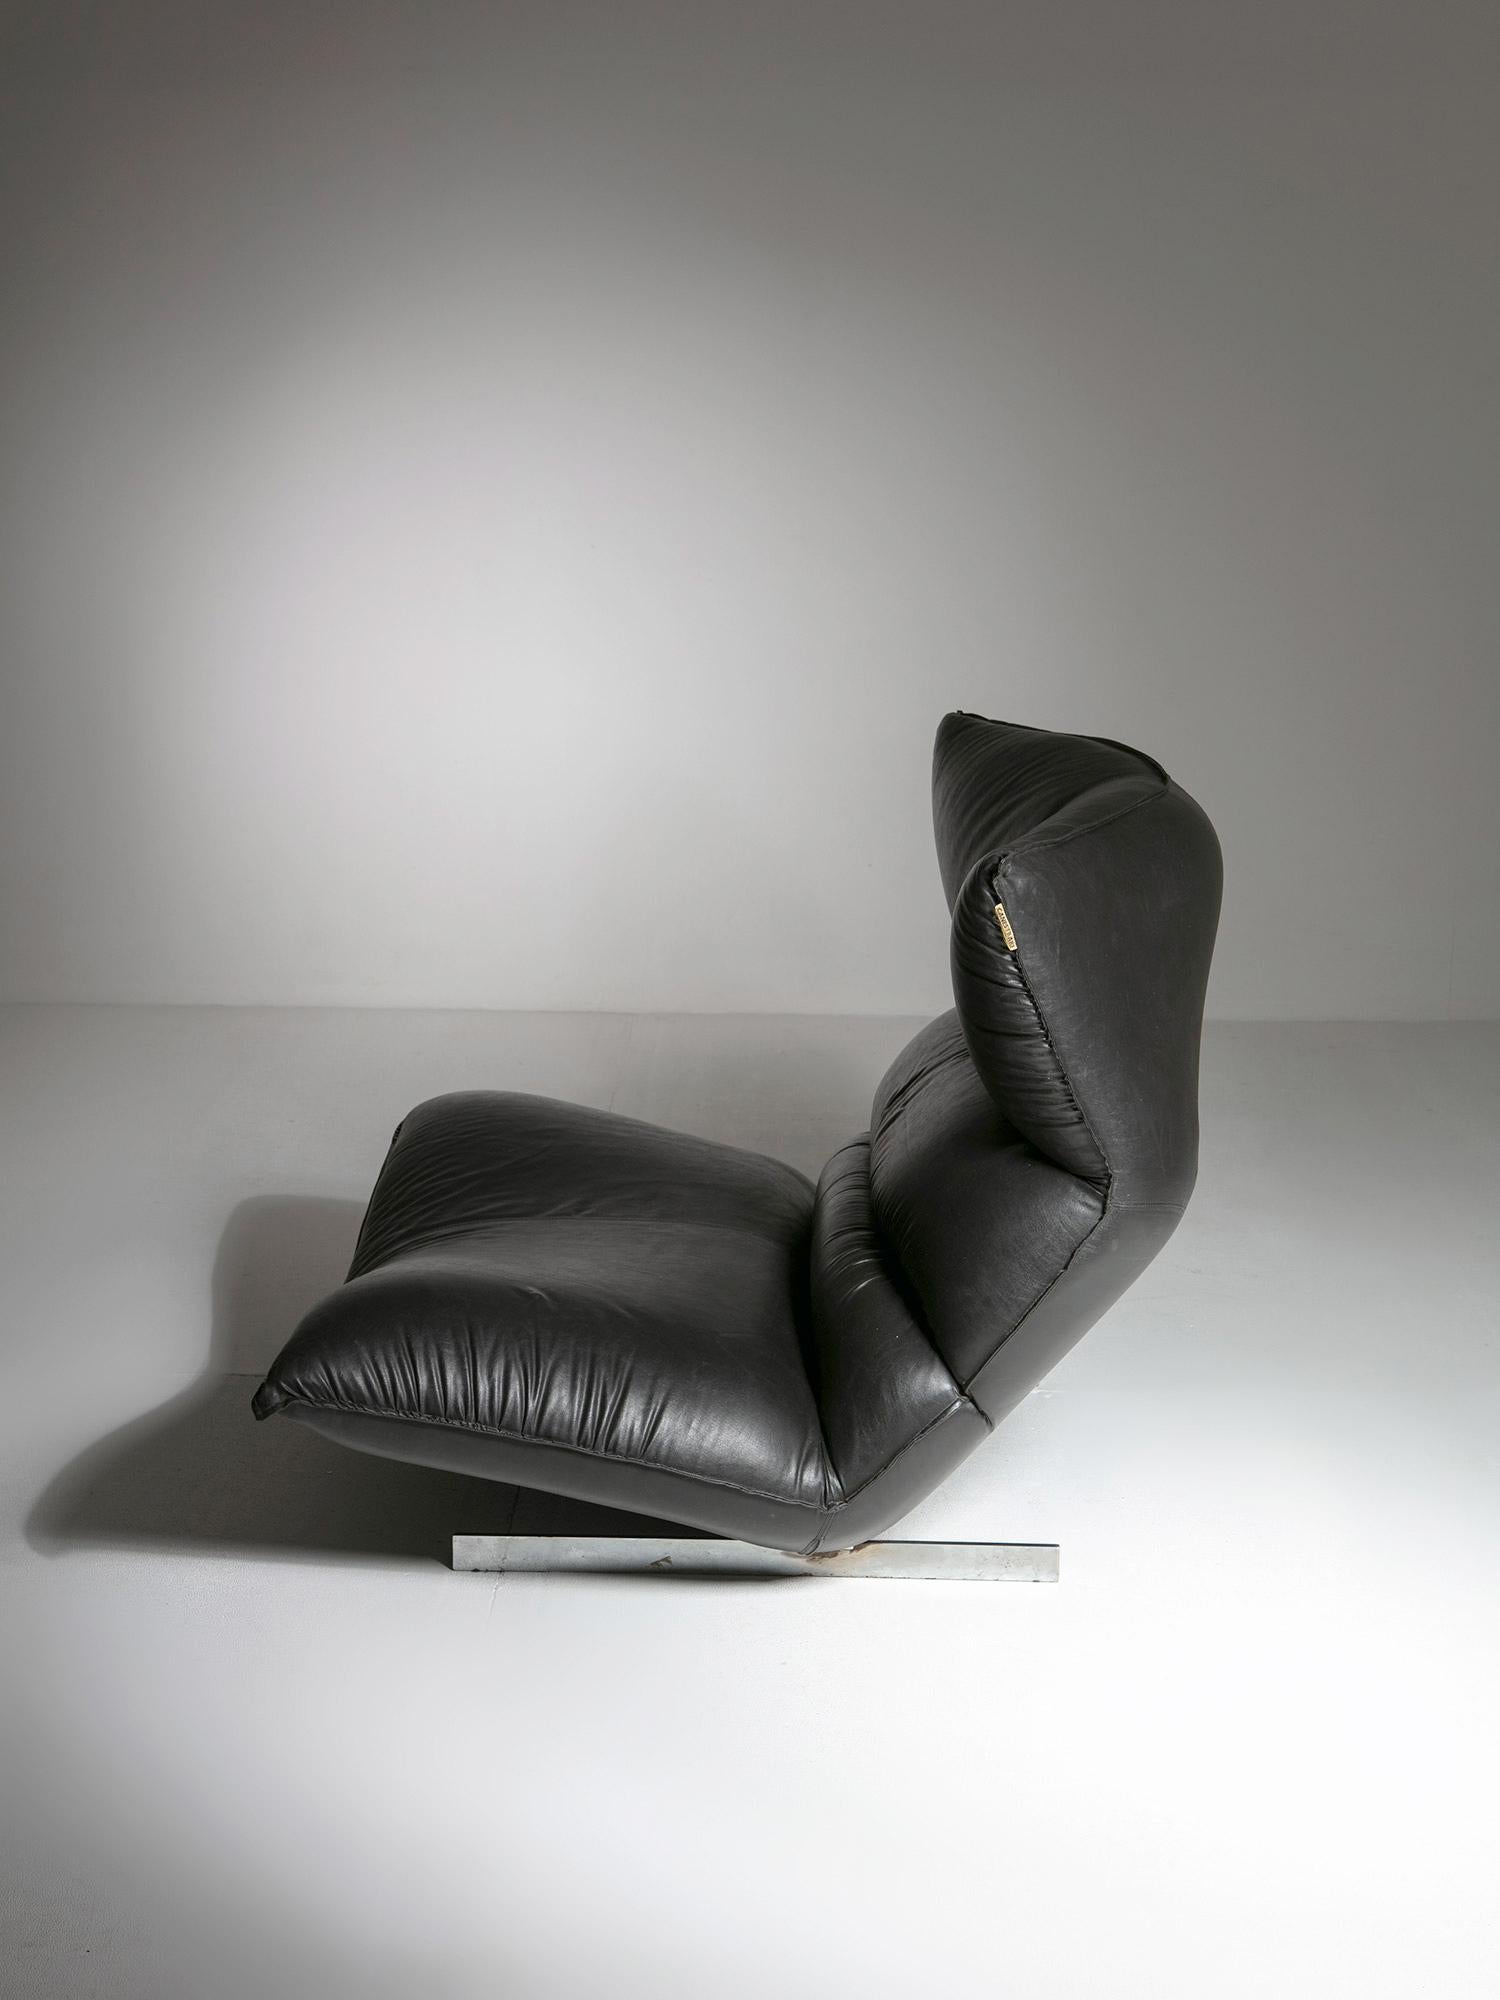 Rare lounge chair by Vittorio Varo 
Large leather covered cushion supported by metal frame.